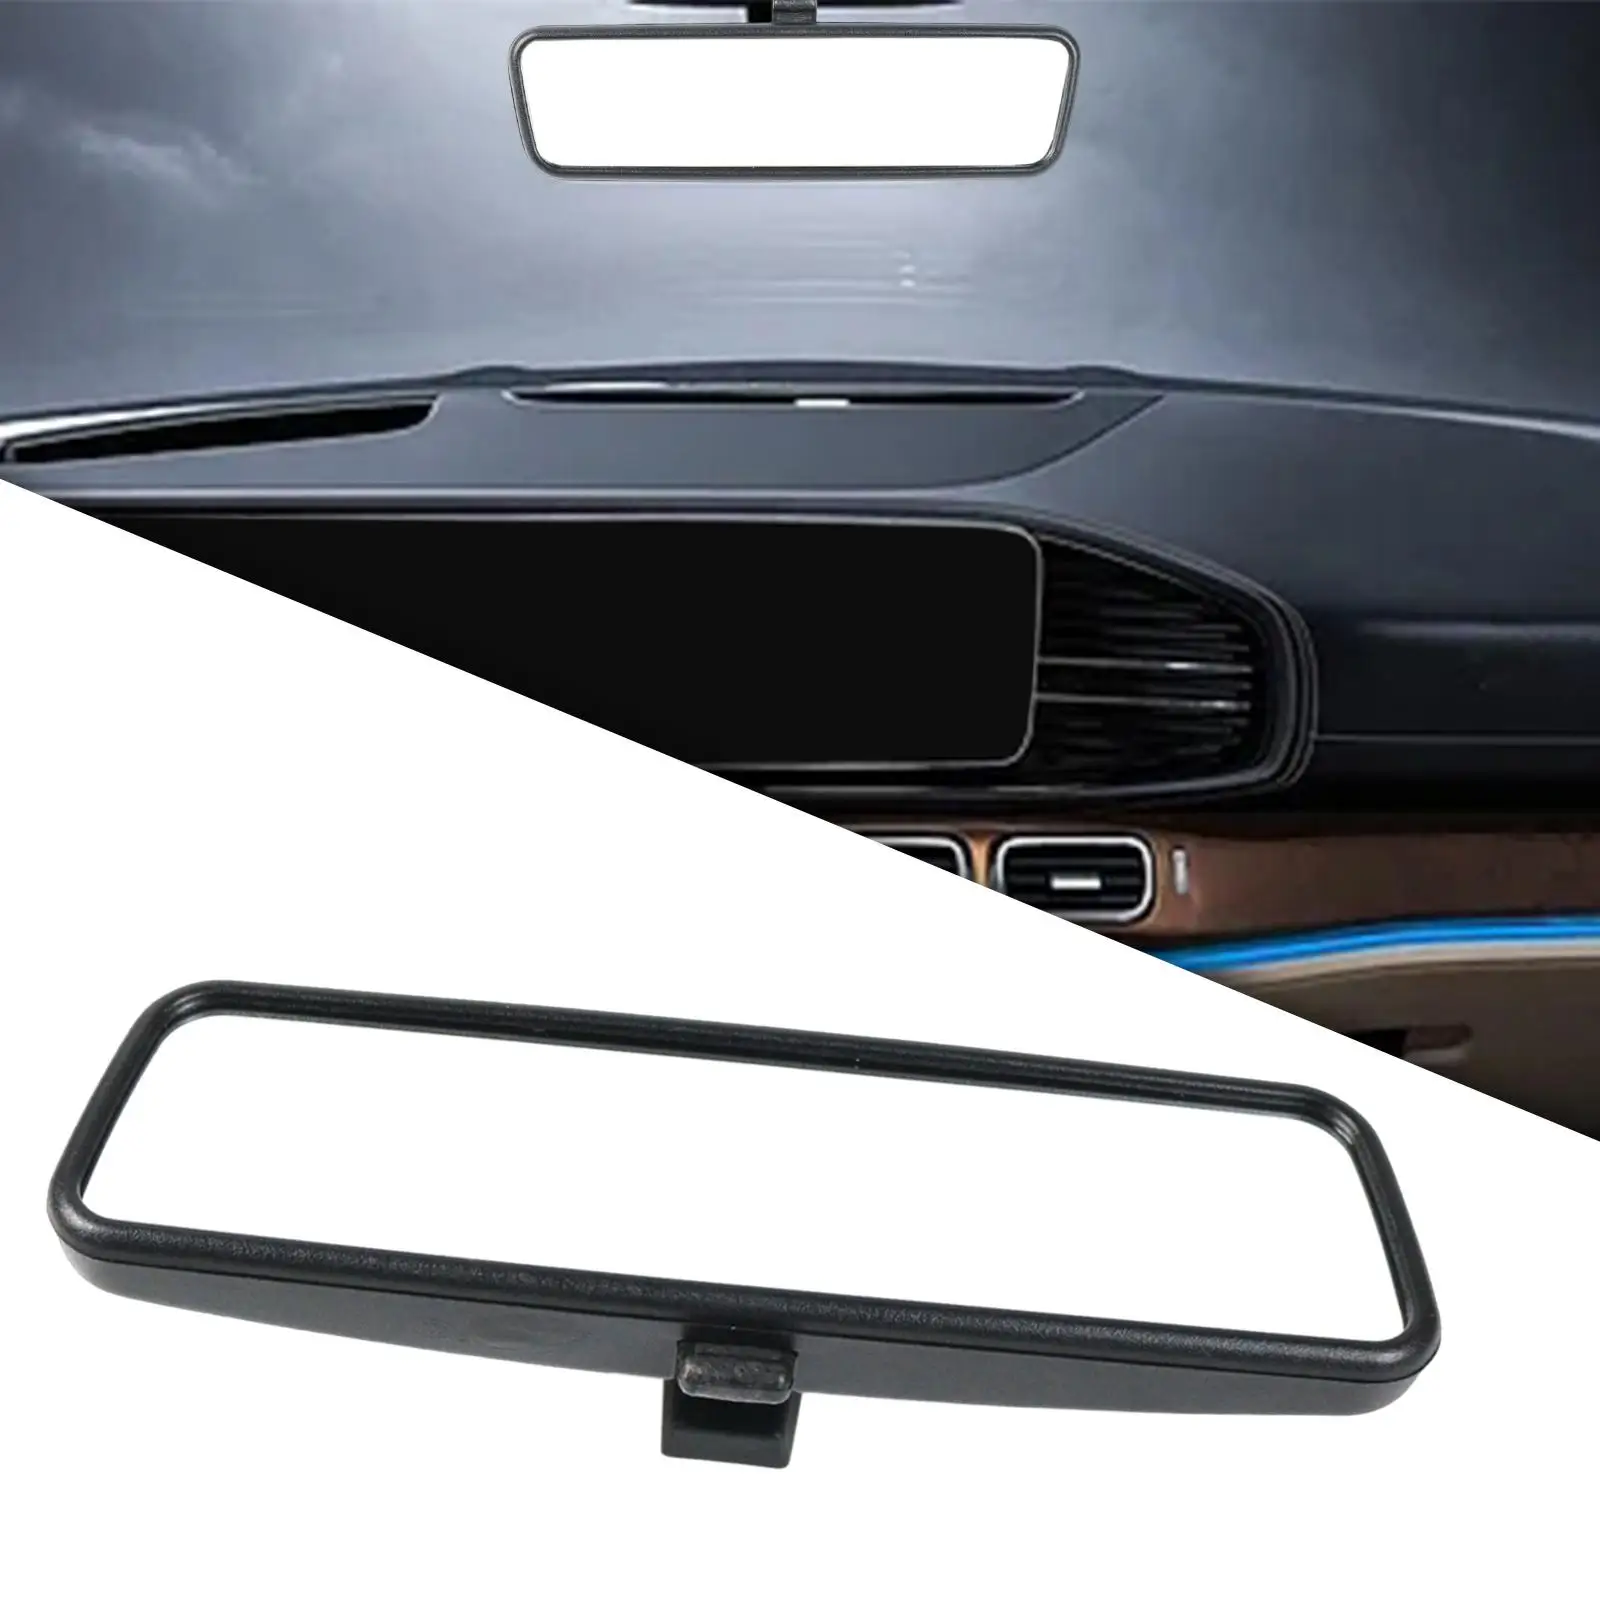 Interior Rear View Mirror 814842 Rearview Mirror for Citroen C1 Accessory Replaces Spare Parts High Performance